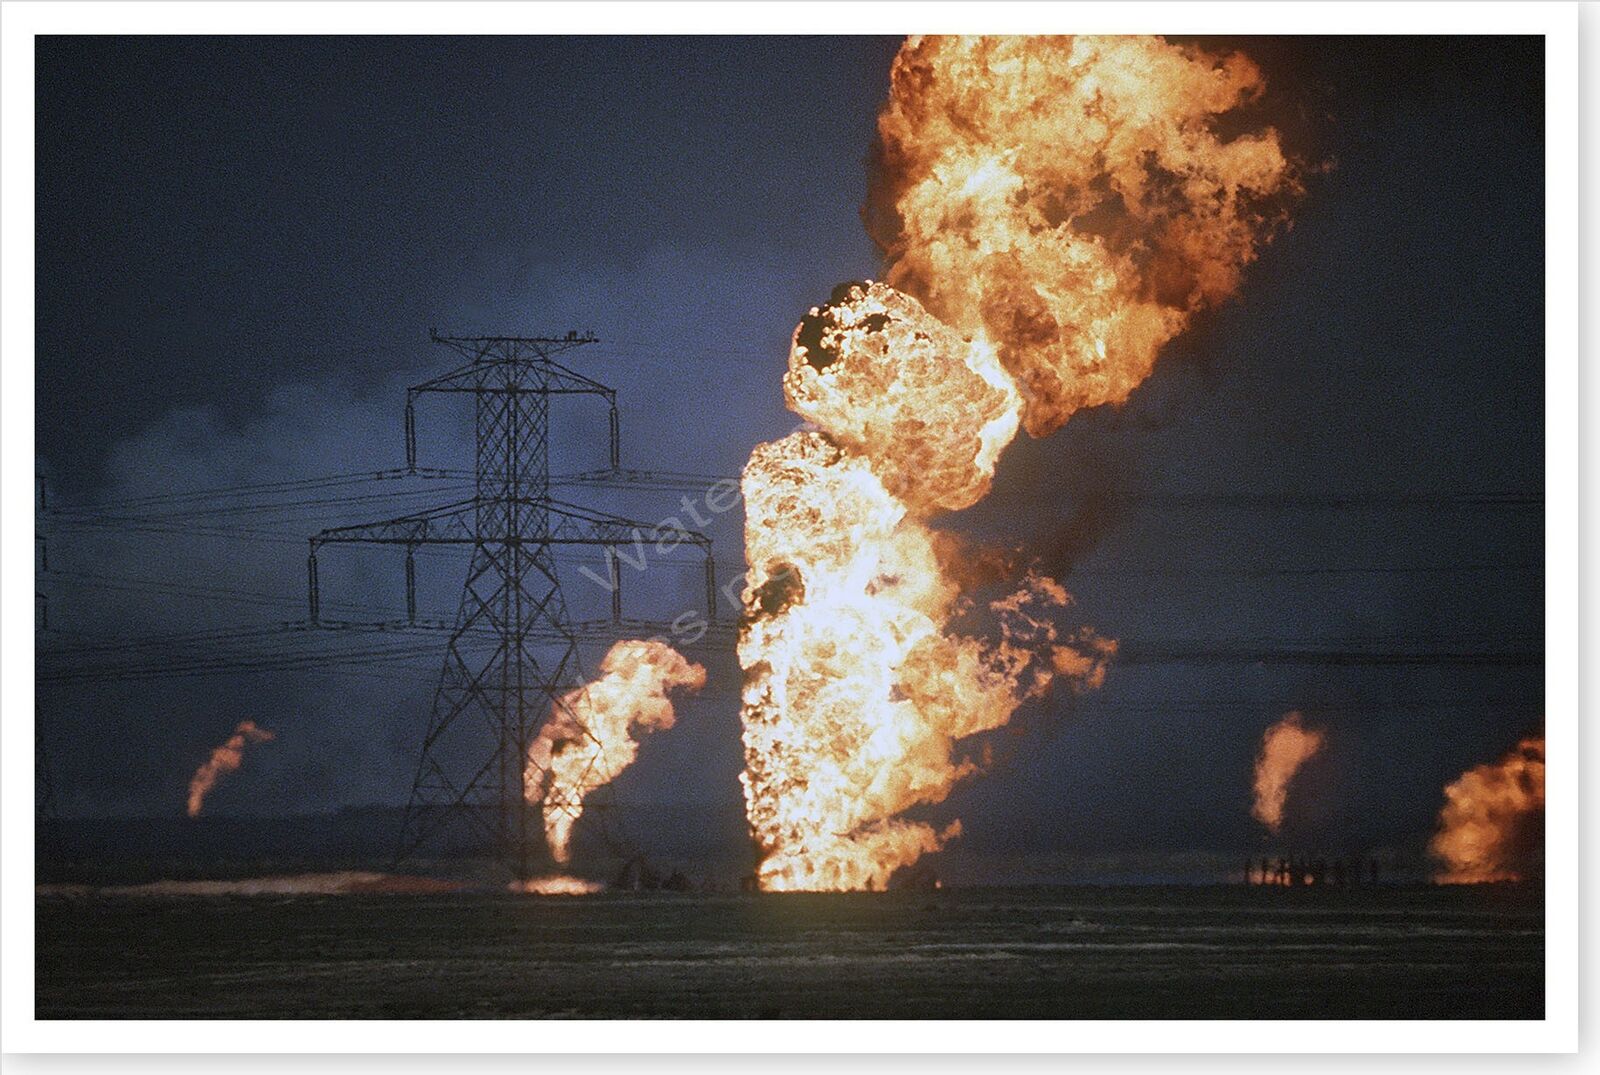 Kuwait Oil Well Fire In Aftermath Of Operation Desert Storm 8 x 12 Photo